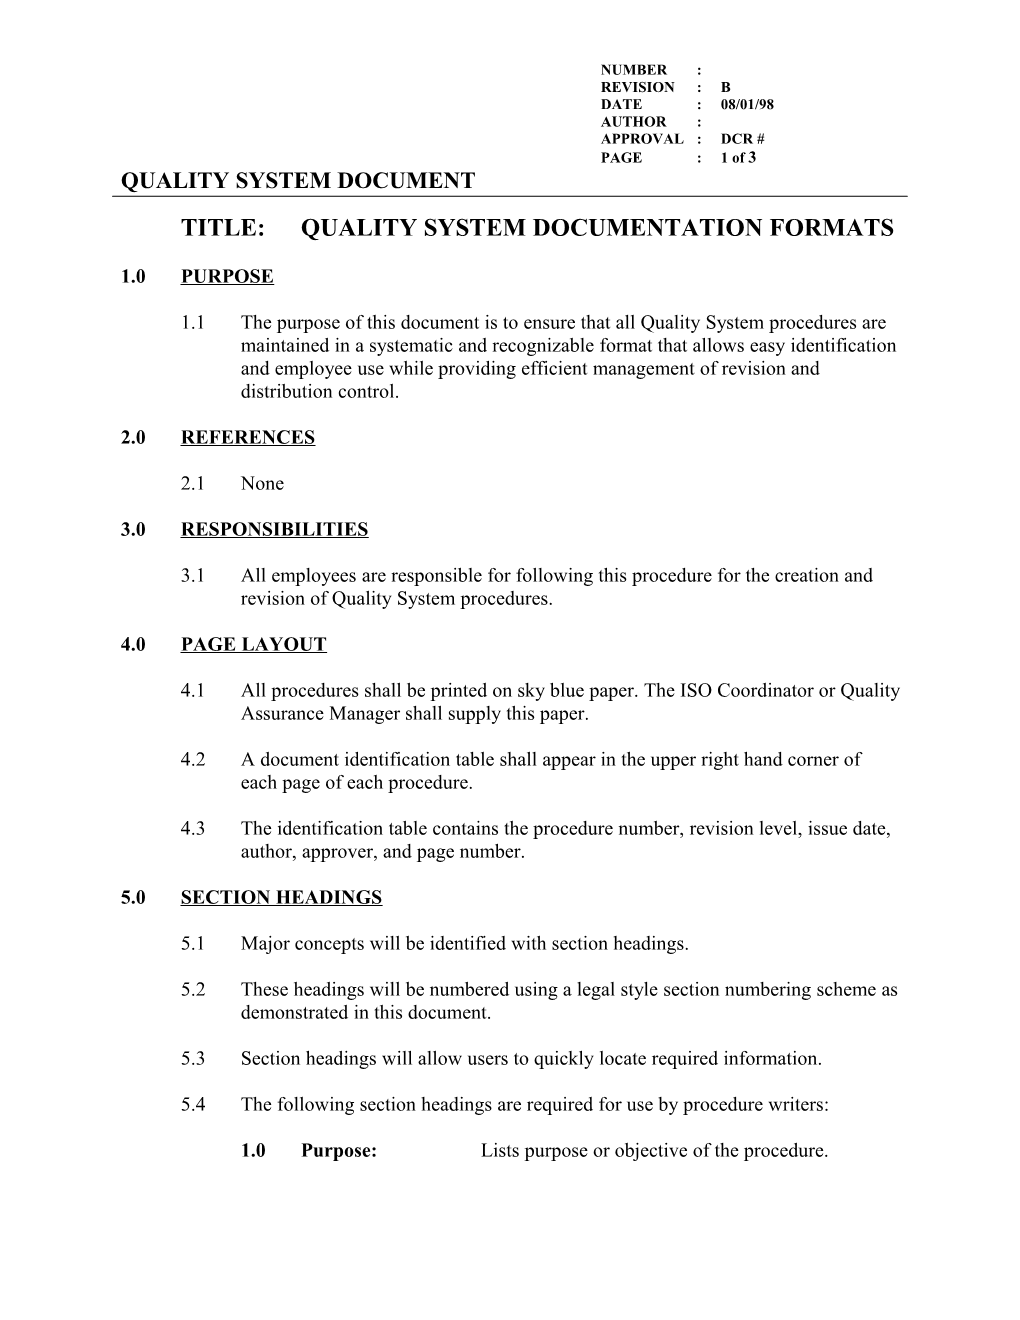 Title:Quality System Documentation Formats